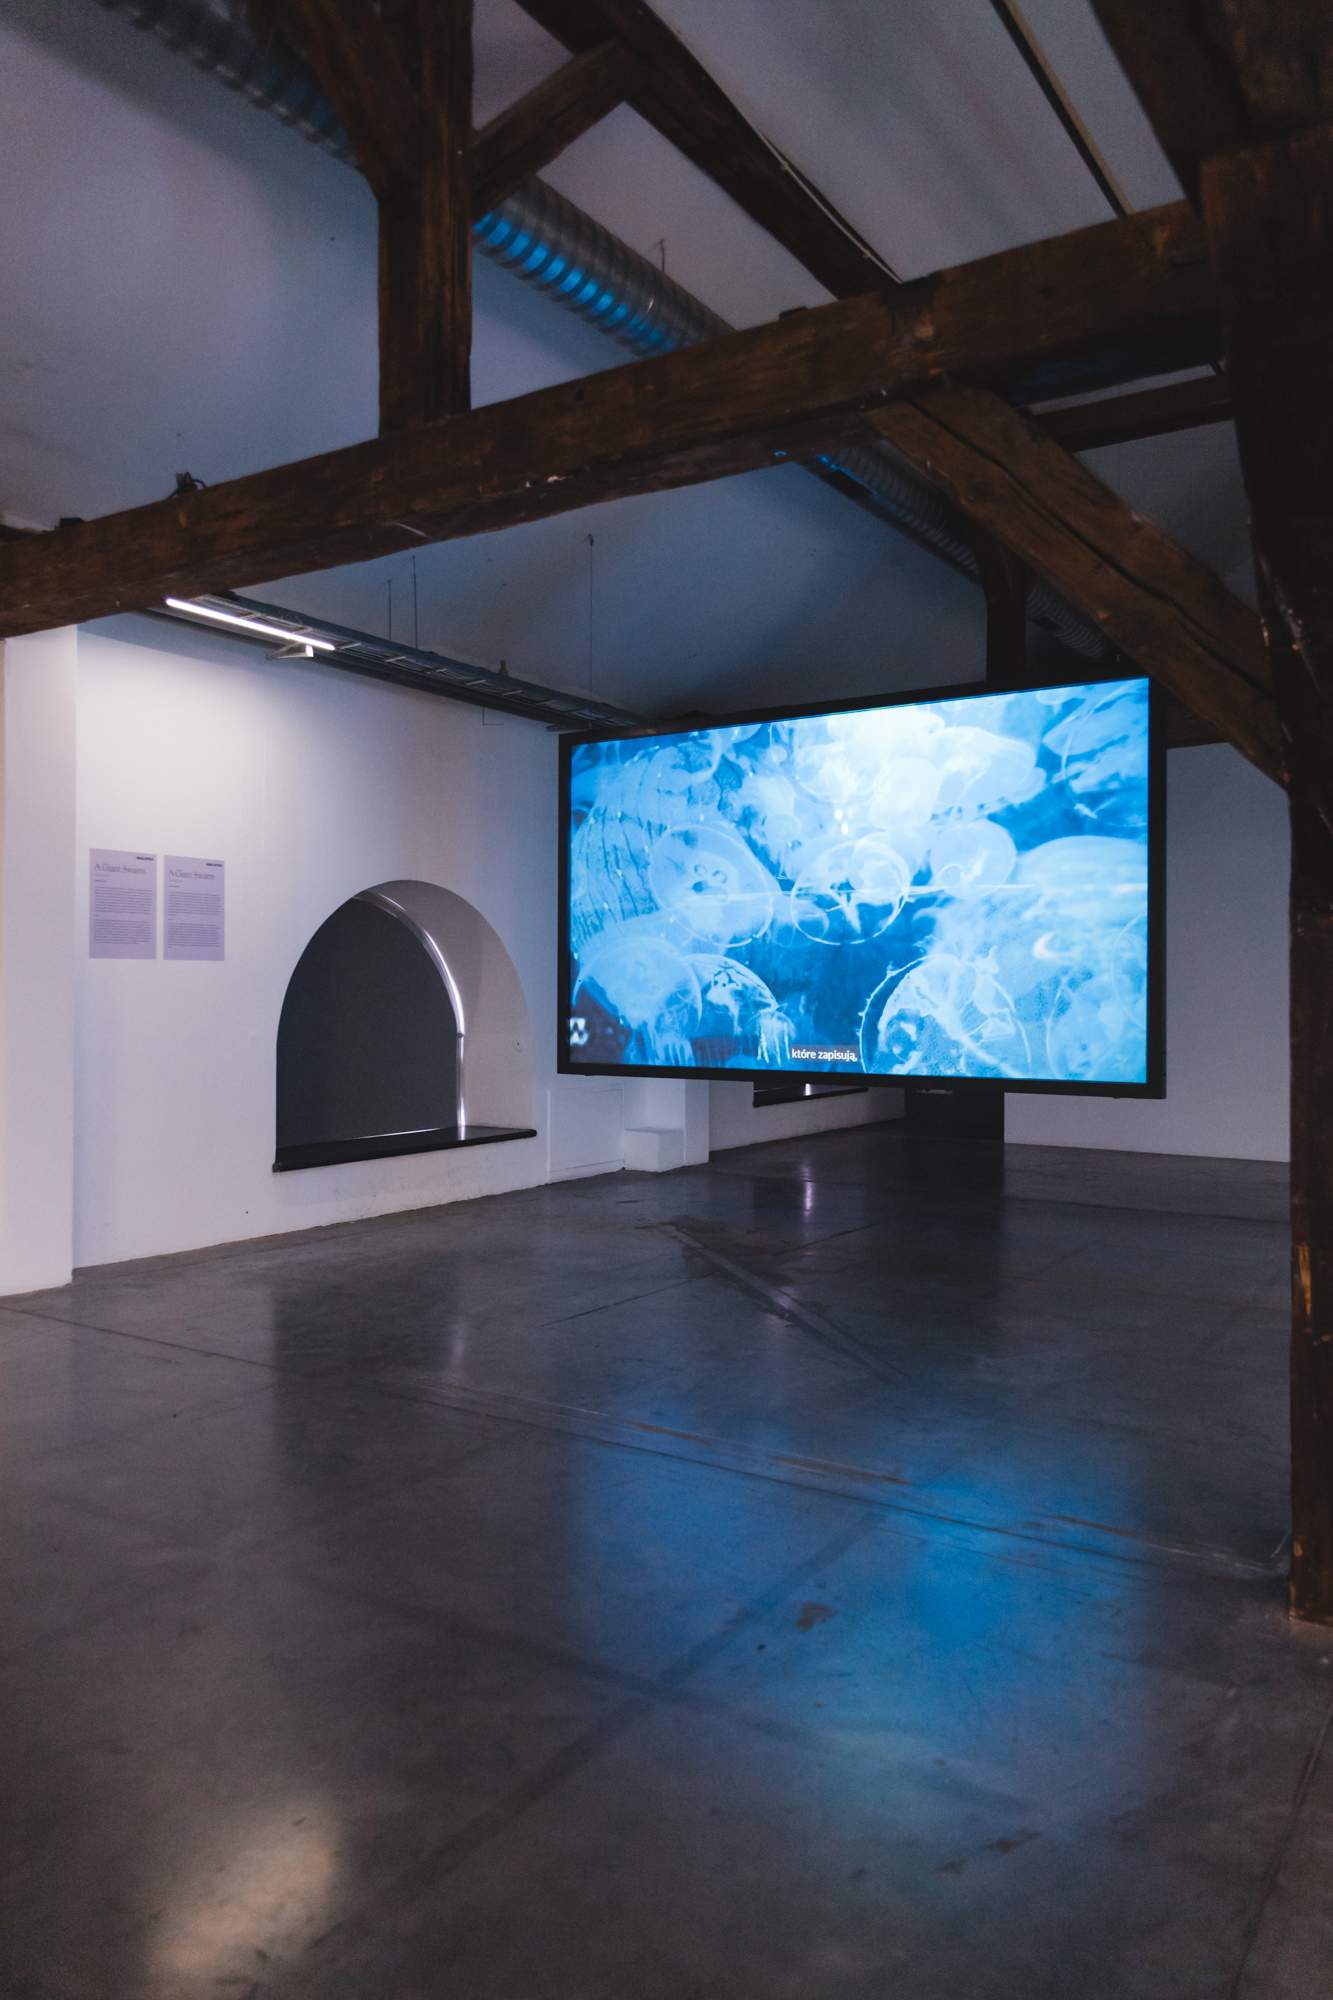 A Giant Swarm, video projection, exhibition view at Wro Art Center / Wro Biennale 2021